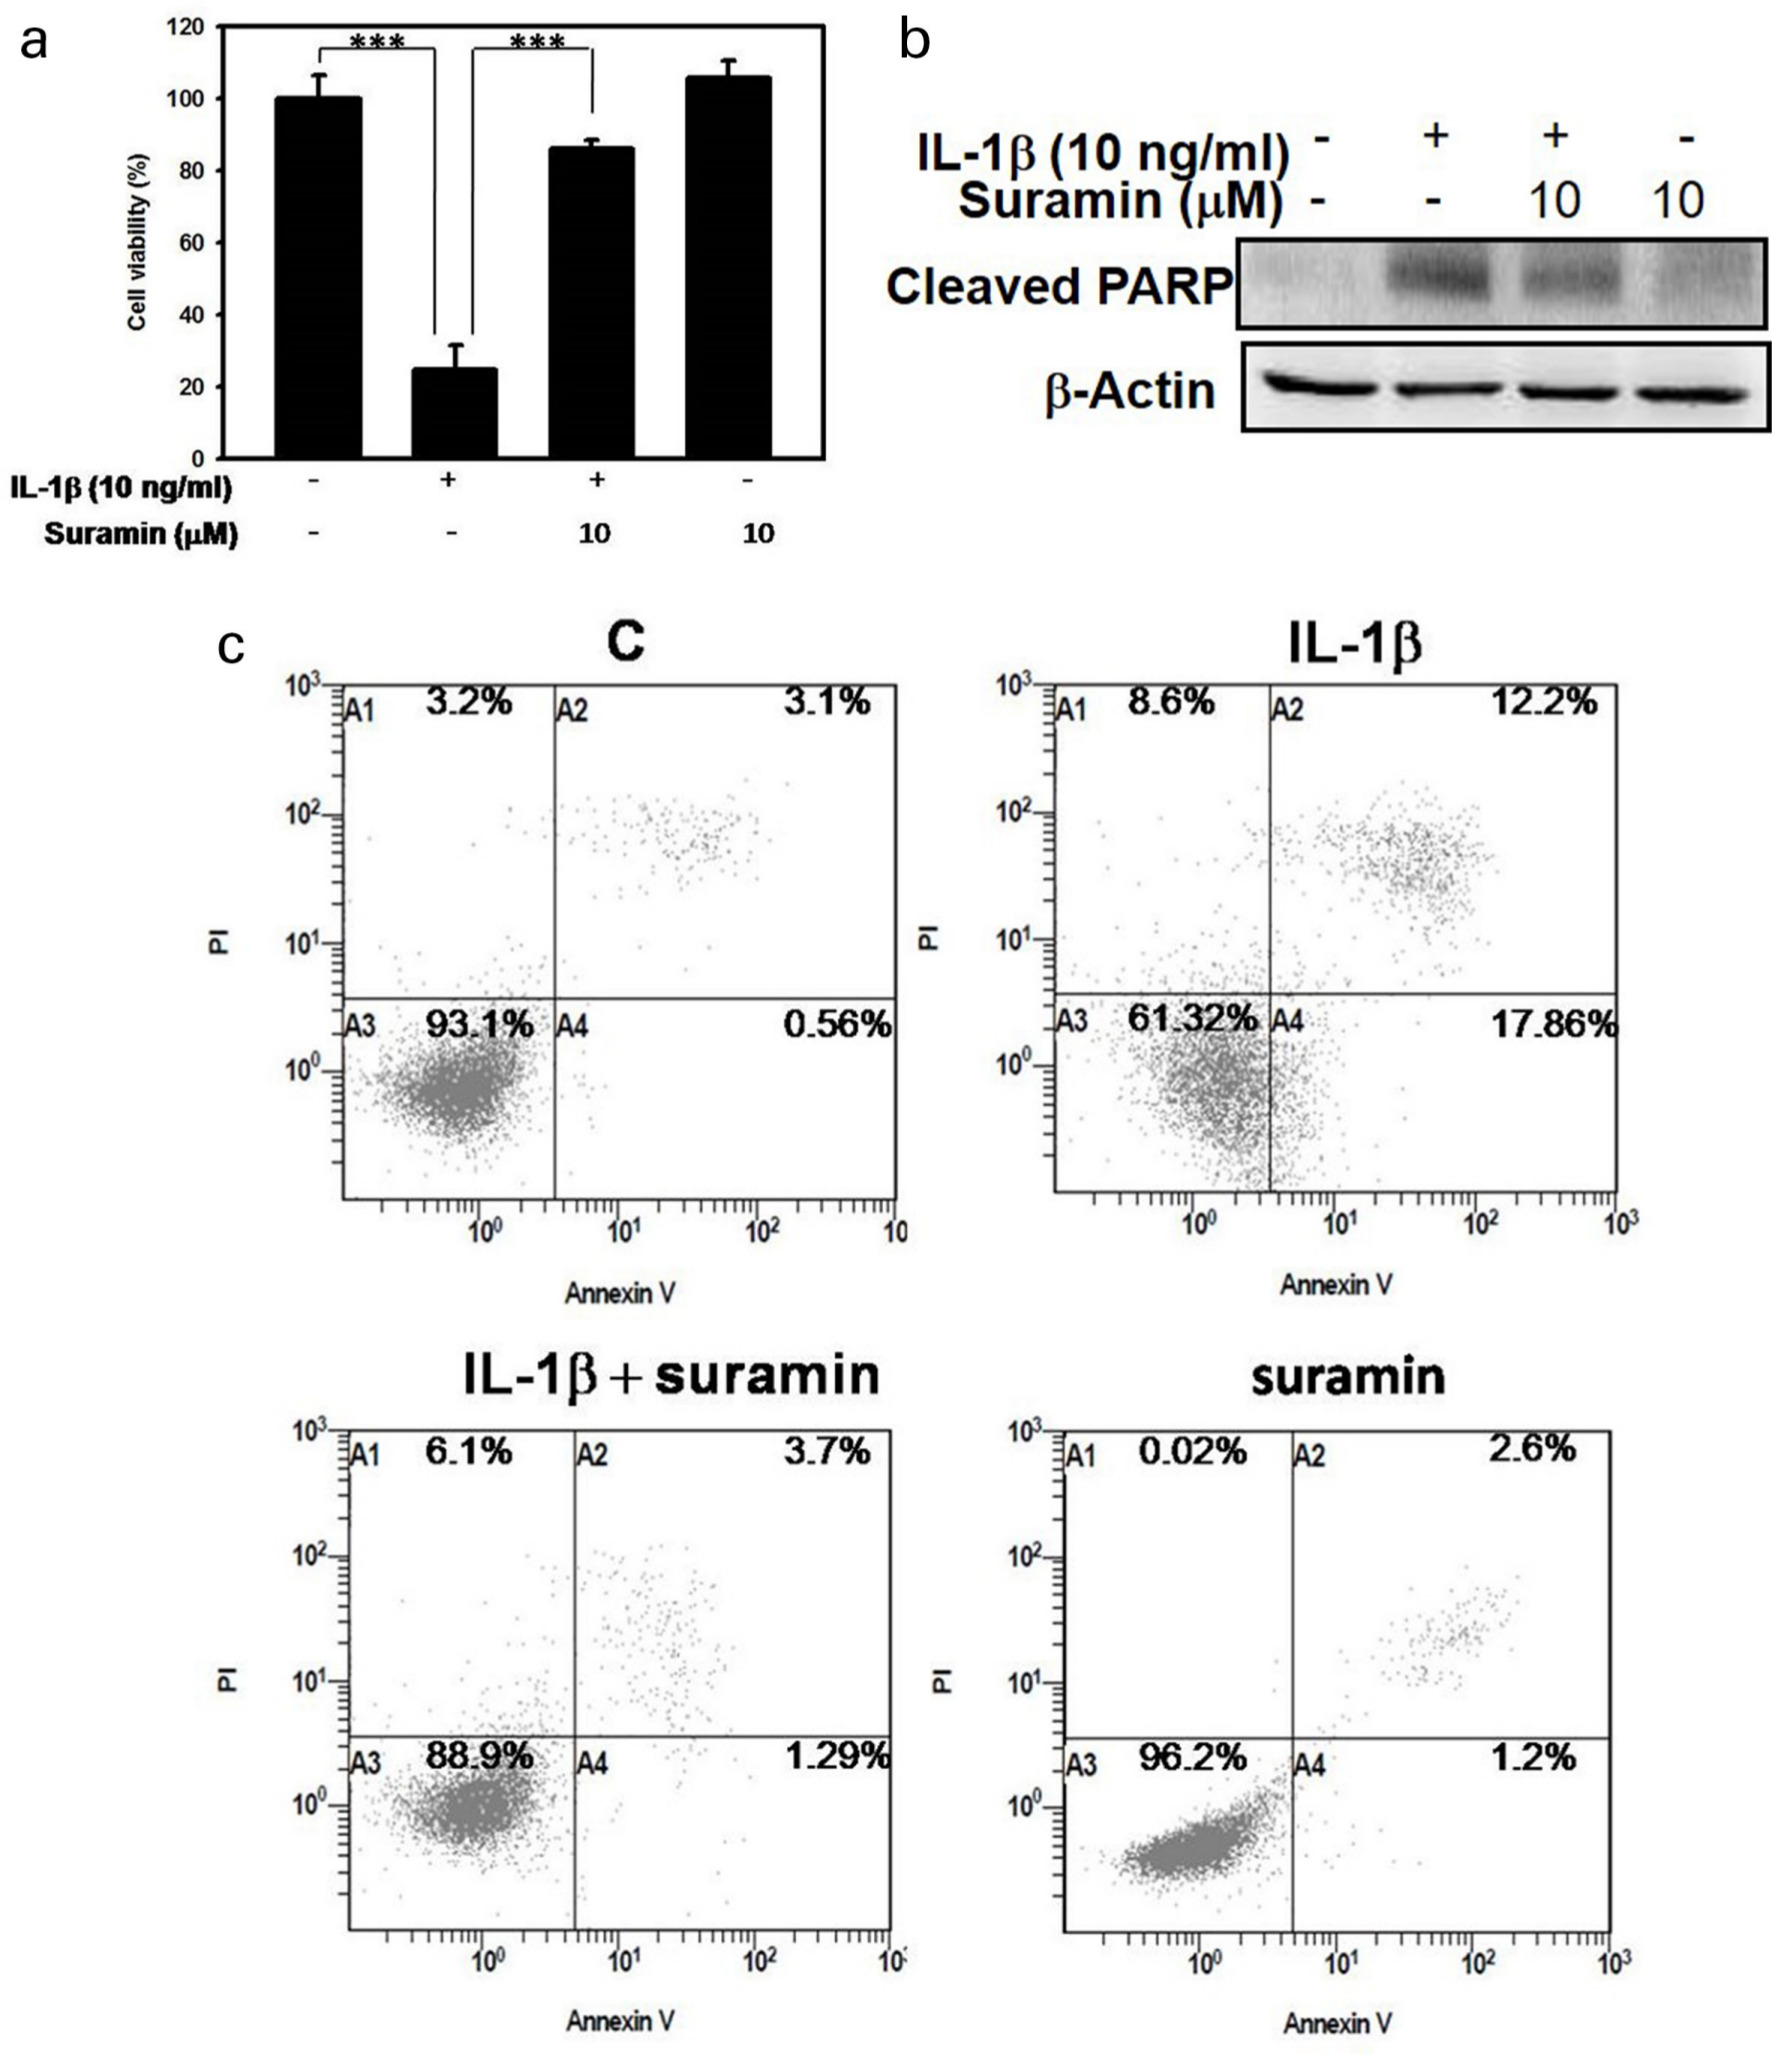 Fig. 4 
            Effect of suramin on interleukin (IL)-1β-induced apoptosis in nucleus pulposus (NP) cells. a) The NP cells were treated with 10 ng/ml IL-1β, 10 μM suramin, or suramin plus IL-1β for 72 hours and cell viability was determined by 3-(4,5-dimethylthiazol-2-yl)-2,5-diphenyltetrazolium bromide (MTT) assay. Values are expressed as the mean and standard deviation of triplicate measurements (***p < 0.001 compared with untreated control). b) Western blot was used to measure the protein levels of cleaved polyadenosine diphosphate-ribose polymerase (PARP) in NP cells treated with 10 ng/ml IL-1β, 10 µM suramin, or suramin plus IL-1β for 72 hours. c) NP cells were cultured in the absence or presence of IL-1β with or without the addition of suramin. The percentages of Annexin V/propidium iodide (PI)-positive cells are shown, represented in the boxed regions (n = 3). c, control.
          